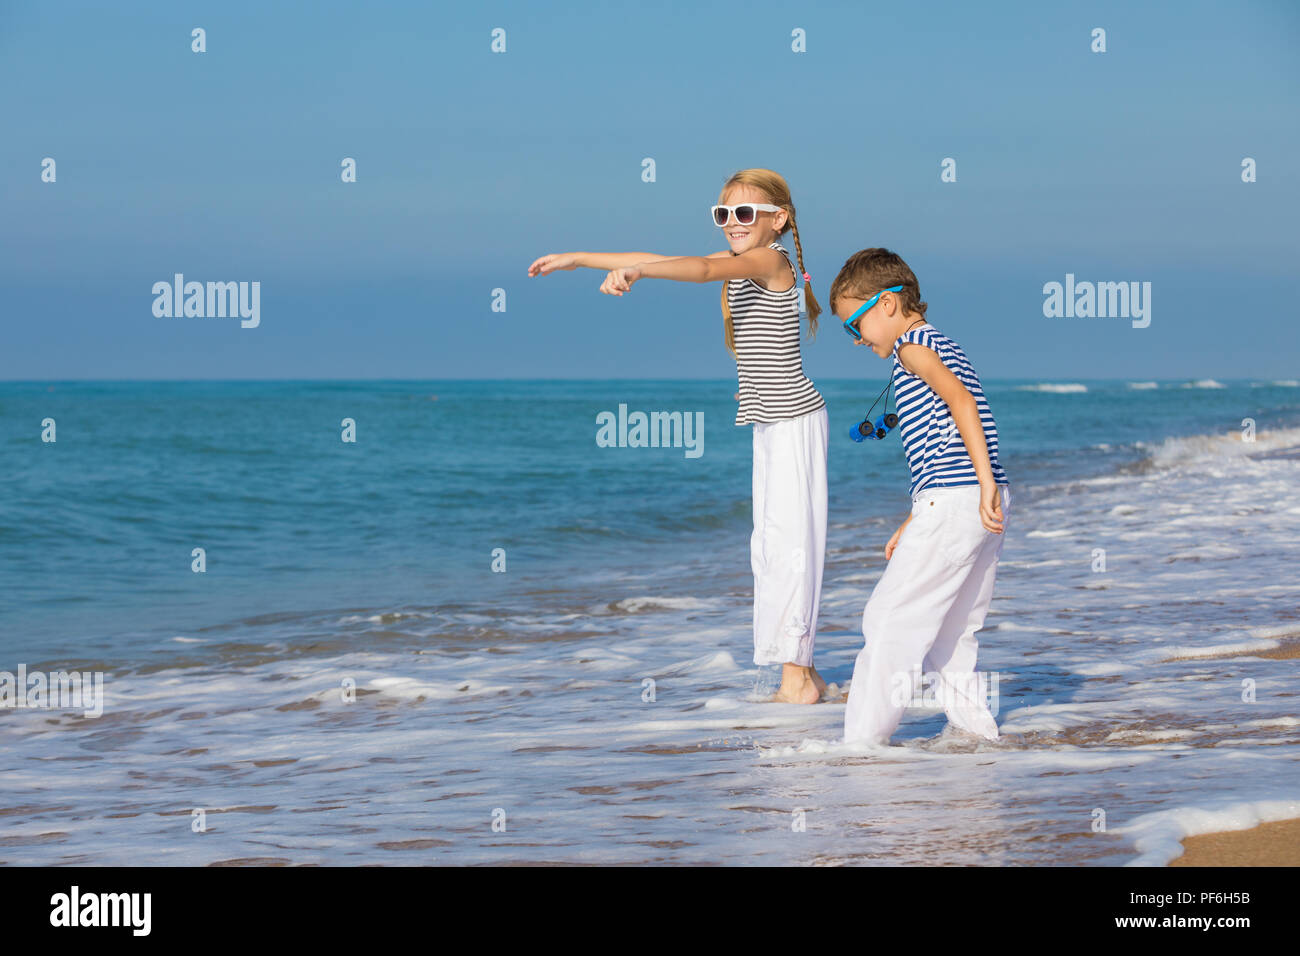 Two happy little children playing on the beach at the day time. They are dressed in sailor's vests. Kids having fun outdoors. Concept of sailors on va Stock Photo